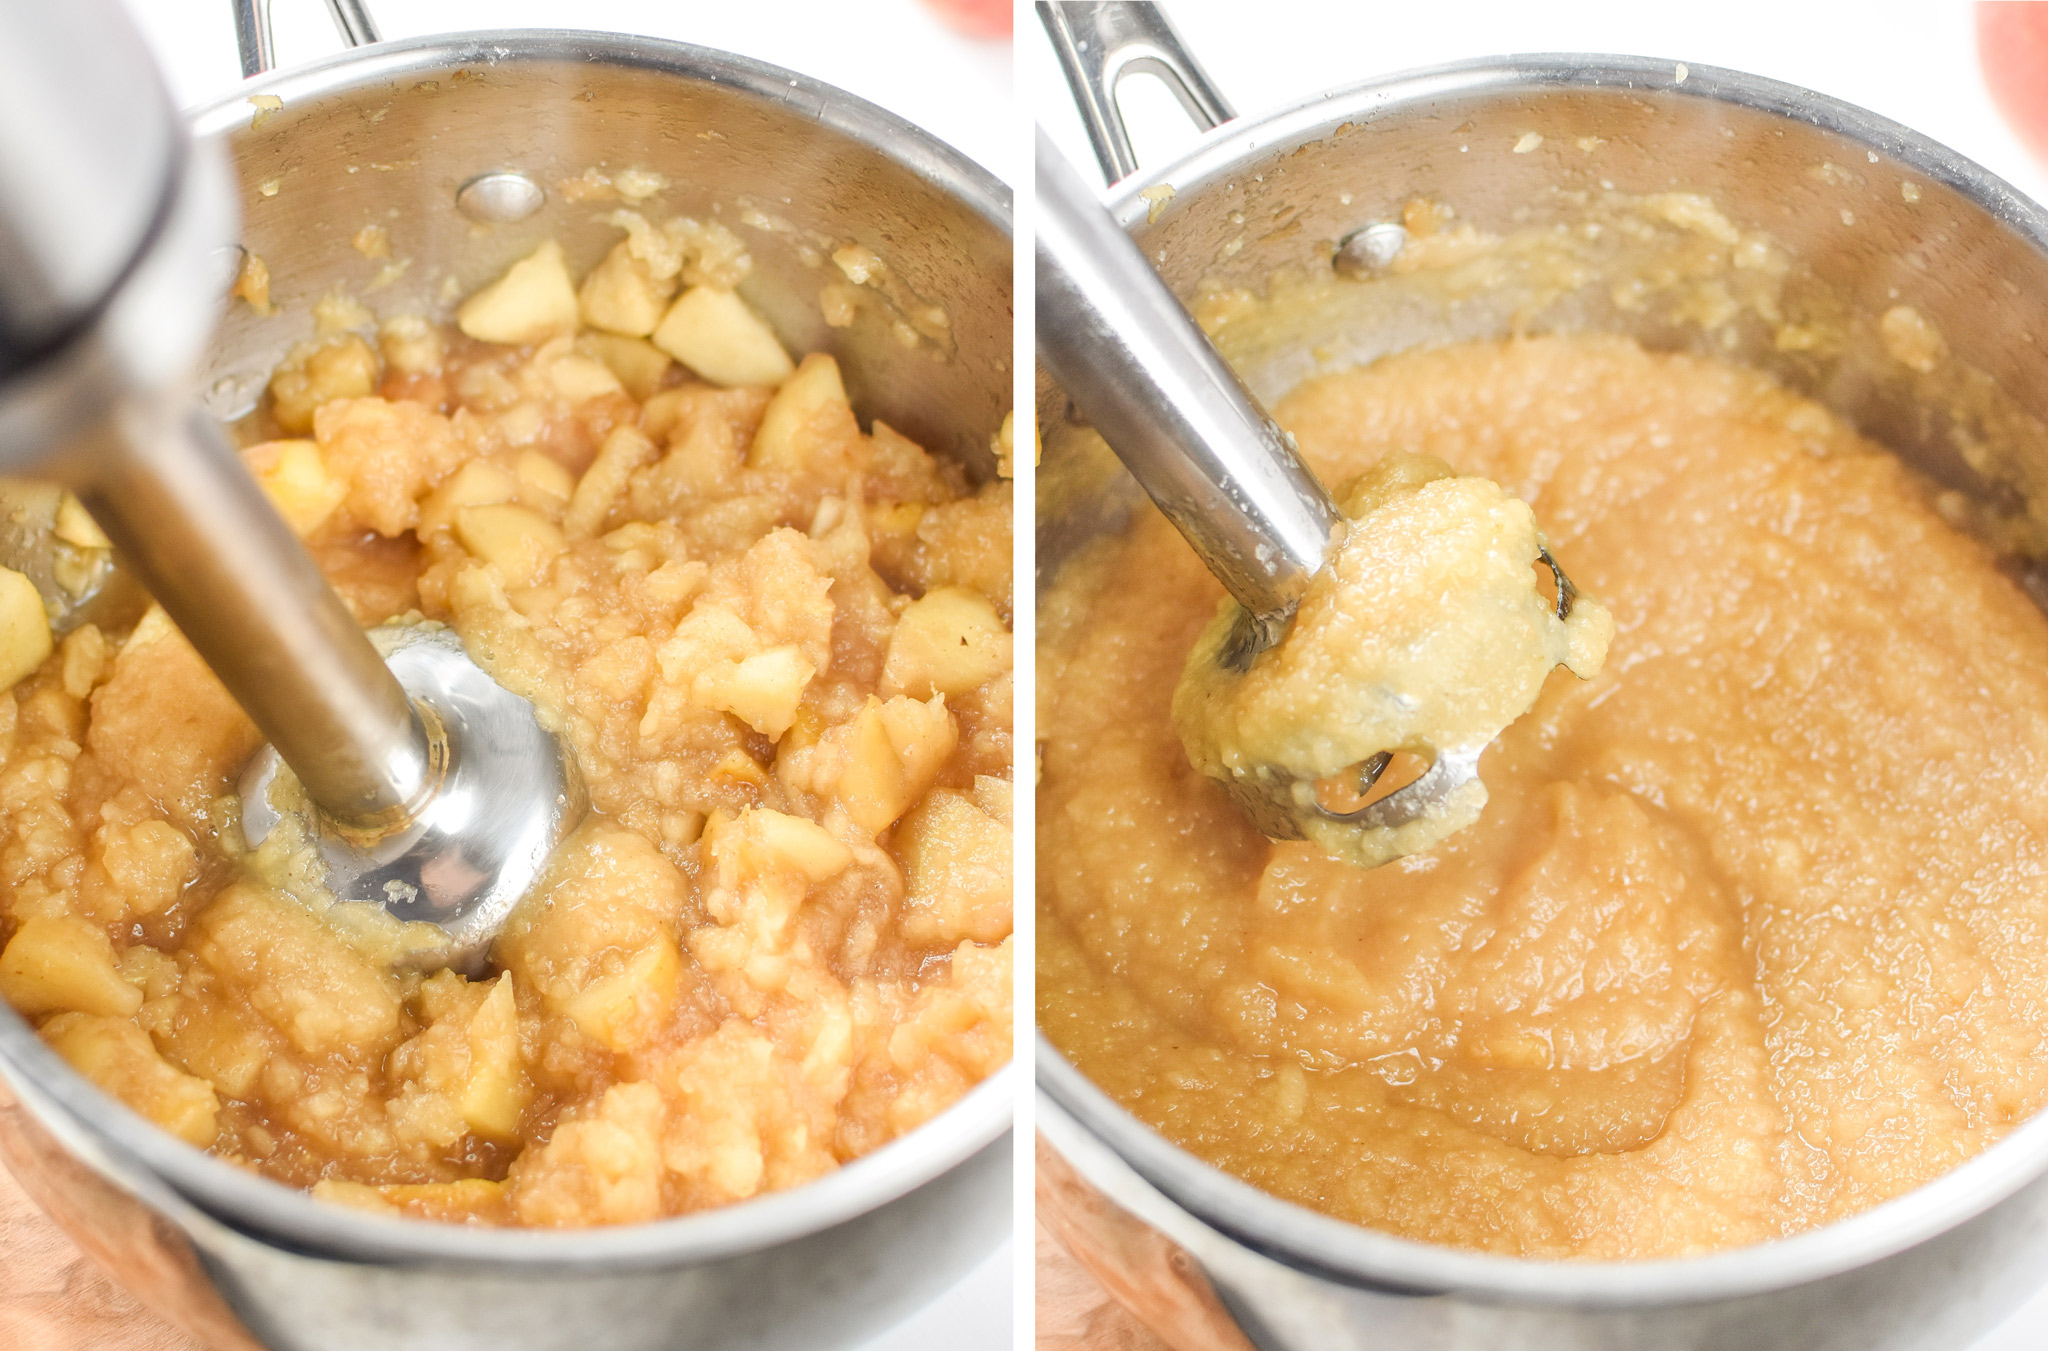 Left: Cooked apples about to be blended. Right: Apples blended into applesauce. Store Bought vs Homemade Applesauce: Which is Cheaper?